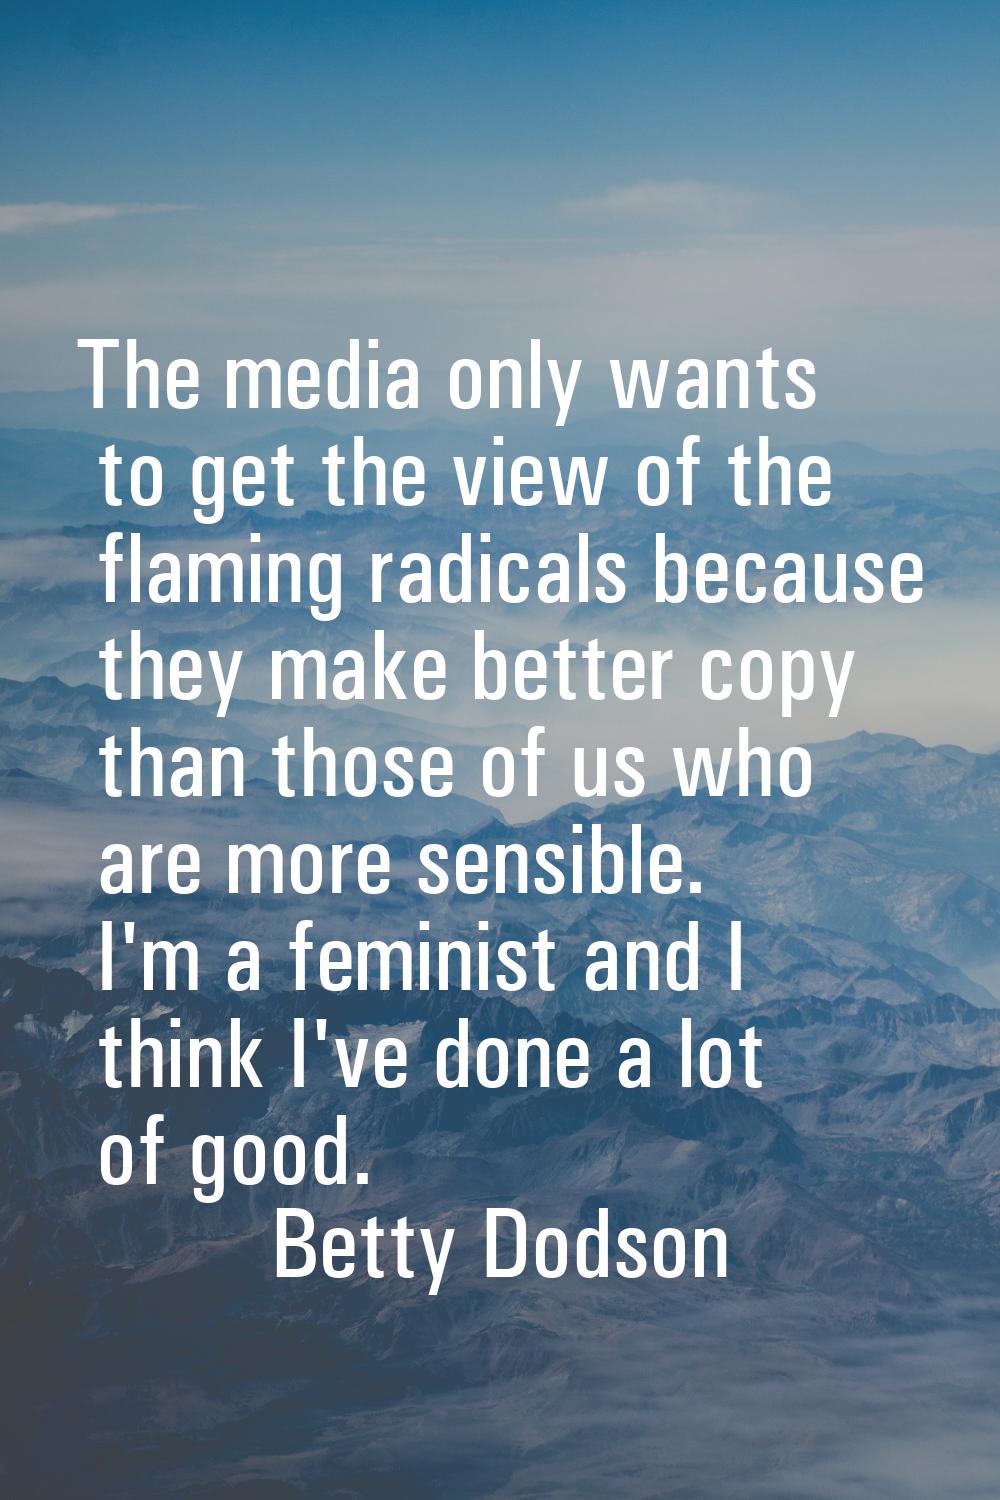 The media only wants to get the view of the flaming radicals because they make better copy than tho